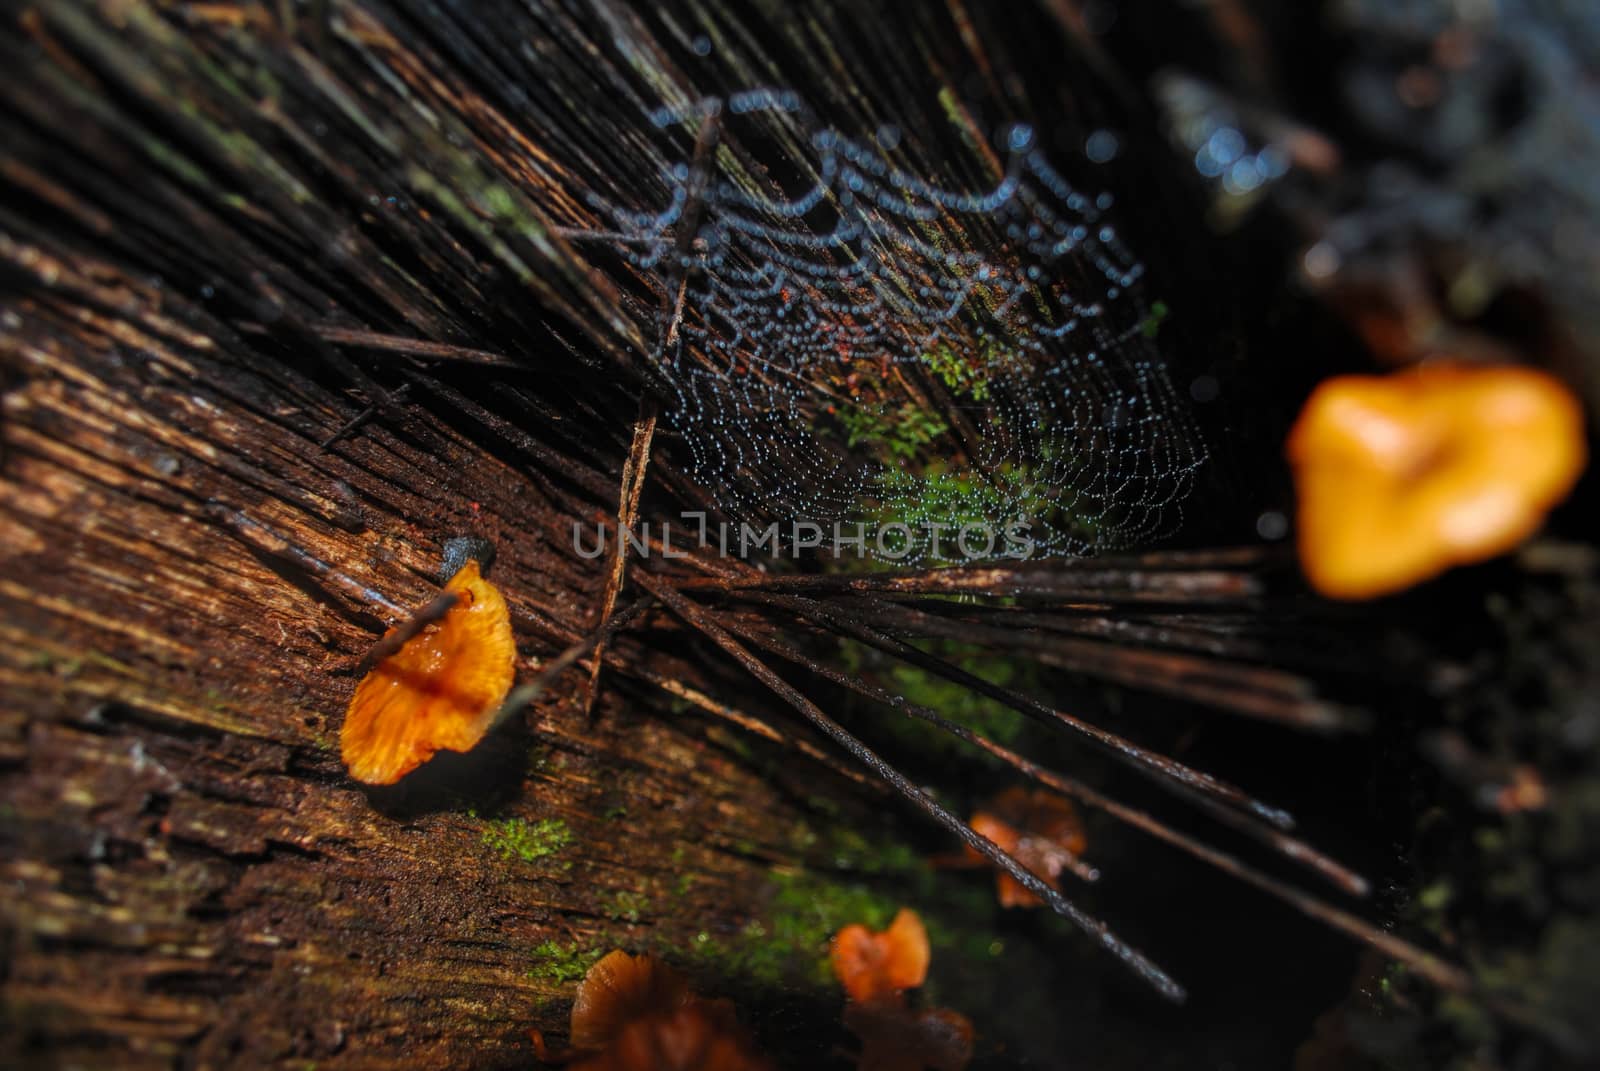 Spiderweb covered in water drops in between orange mushrooms near the forest floor in Bolivia